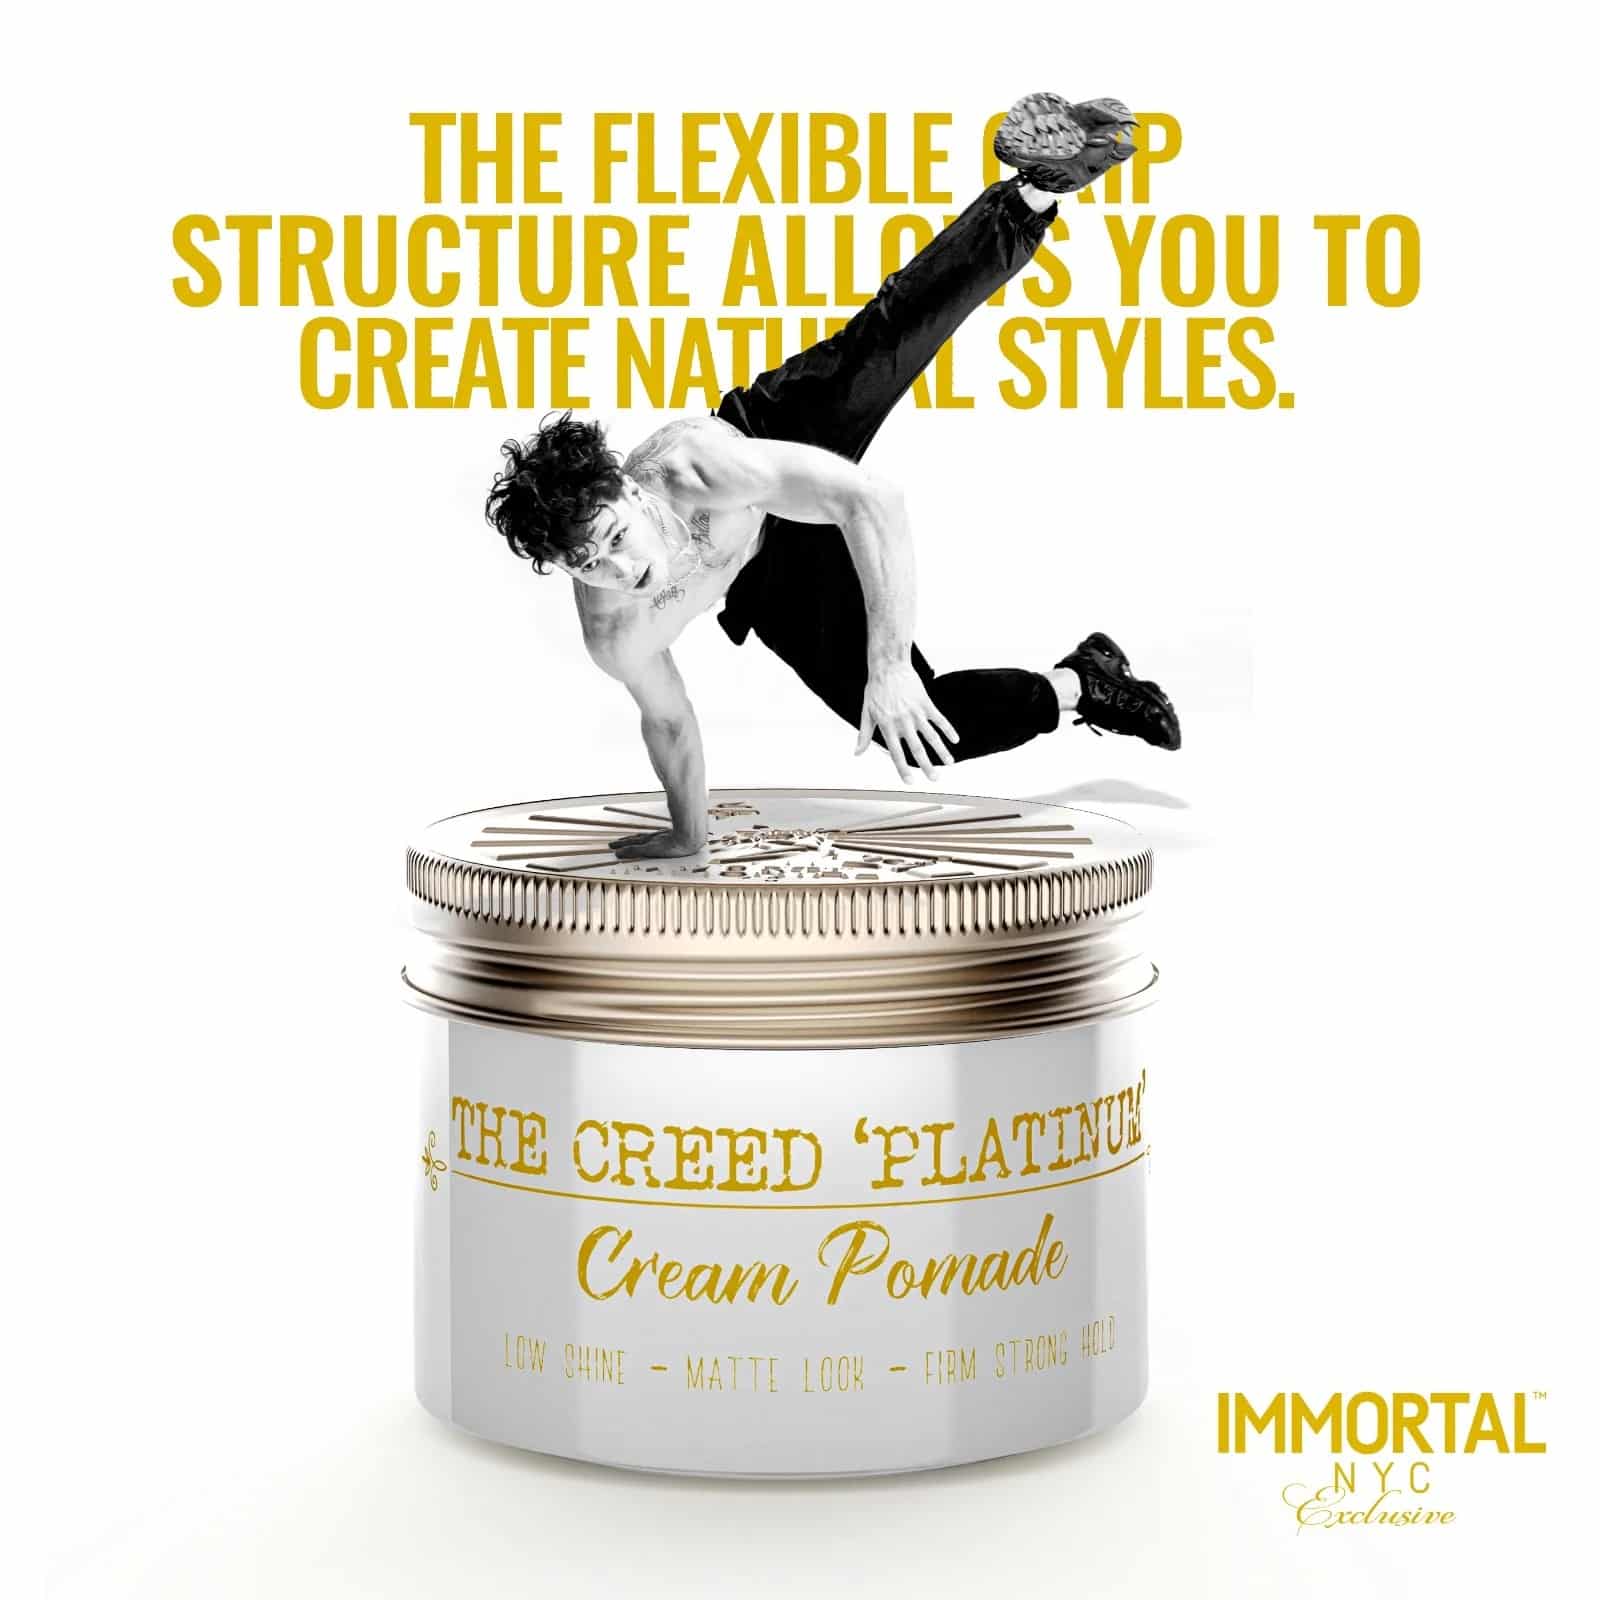 Immortal NYC The Creed Platinum Cream Pomade Poster